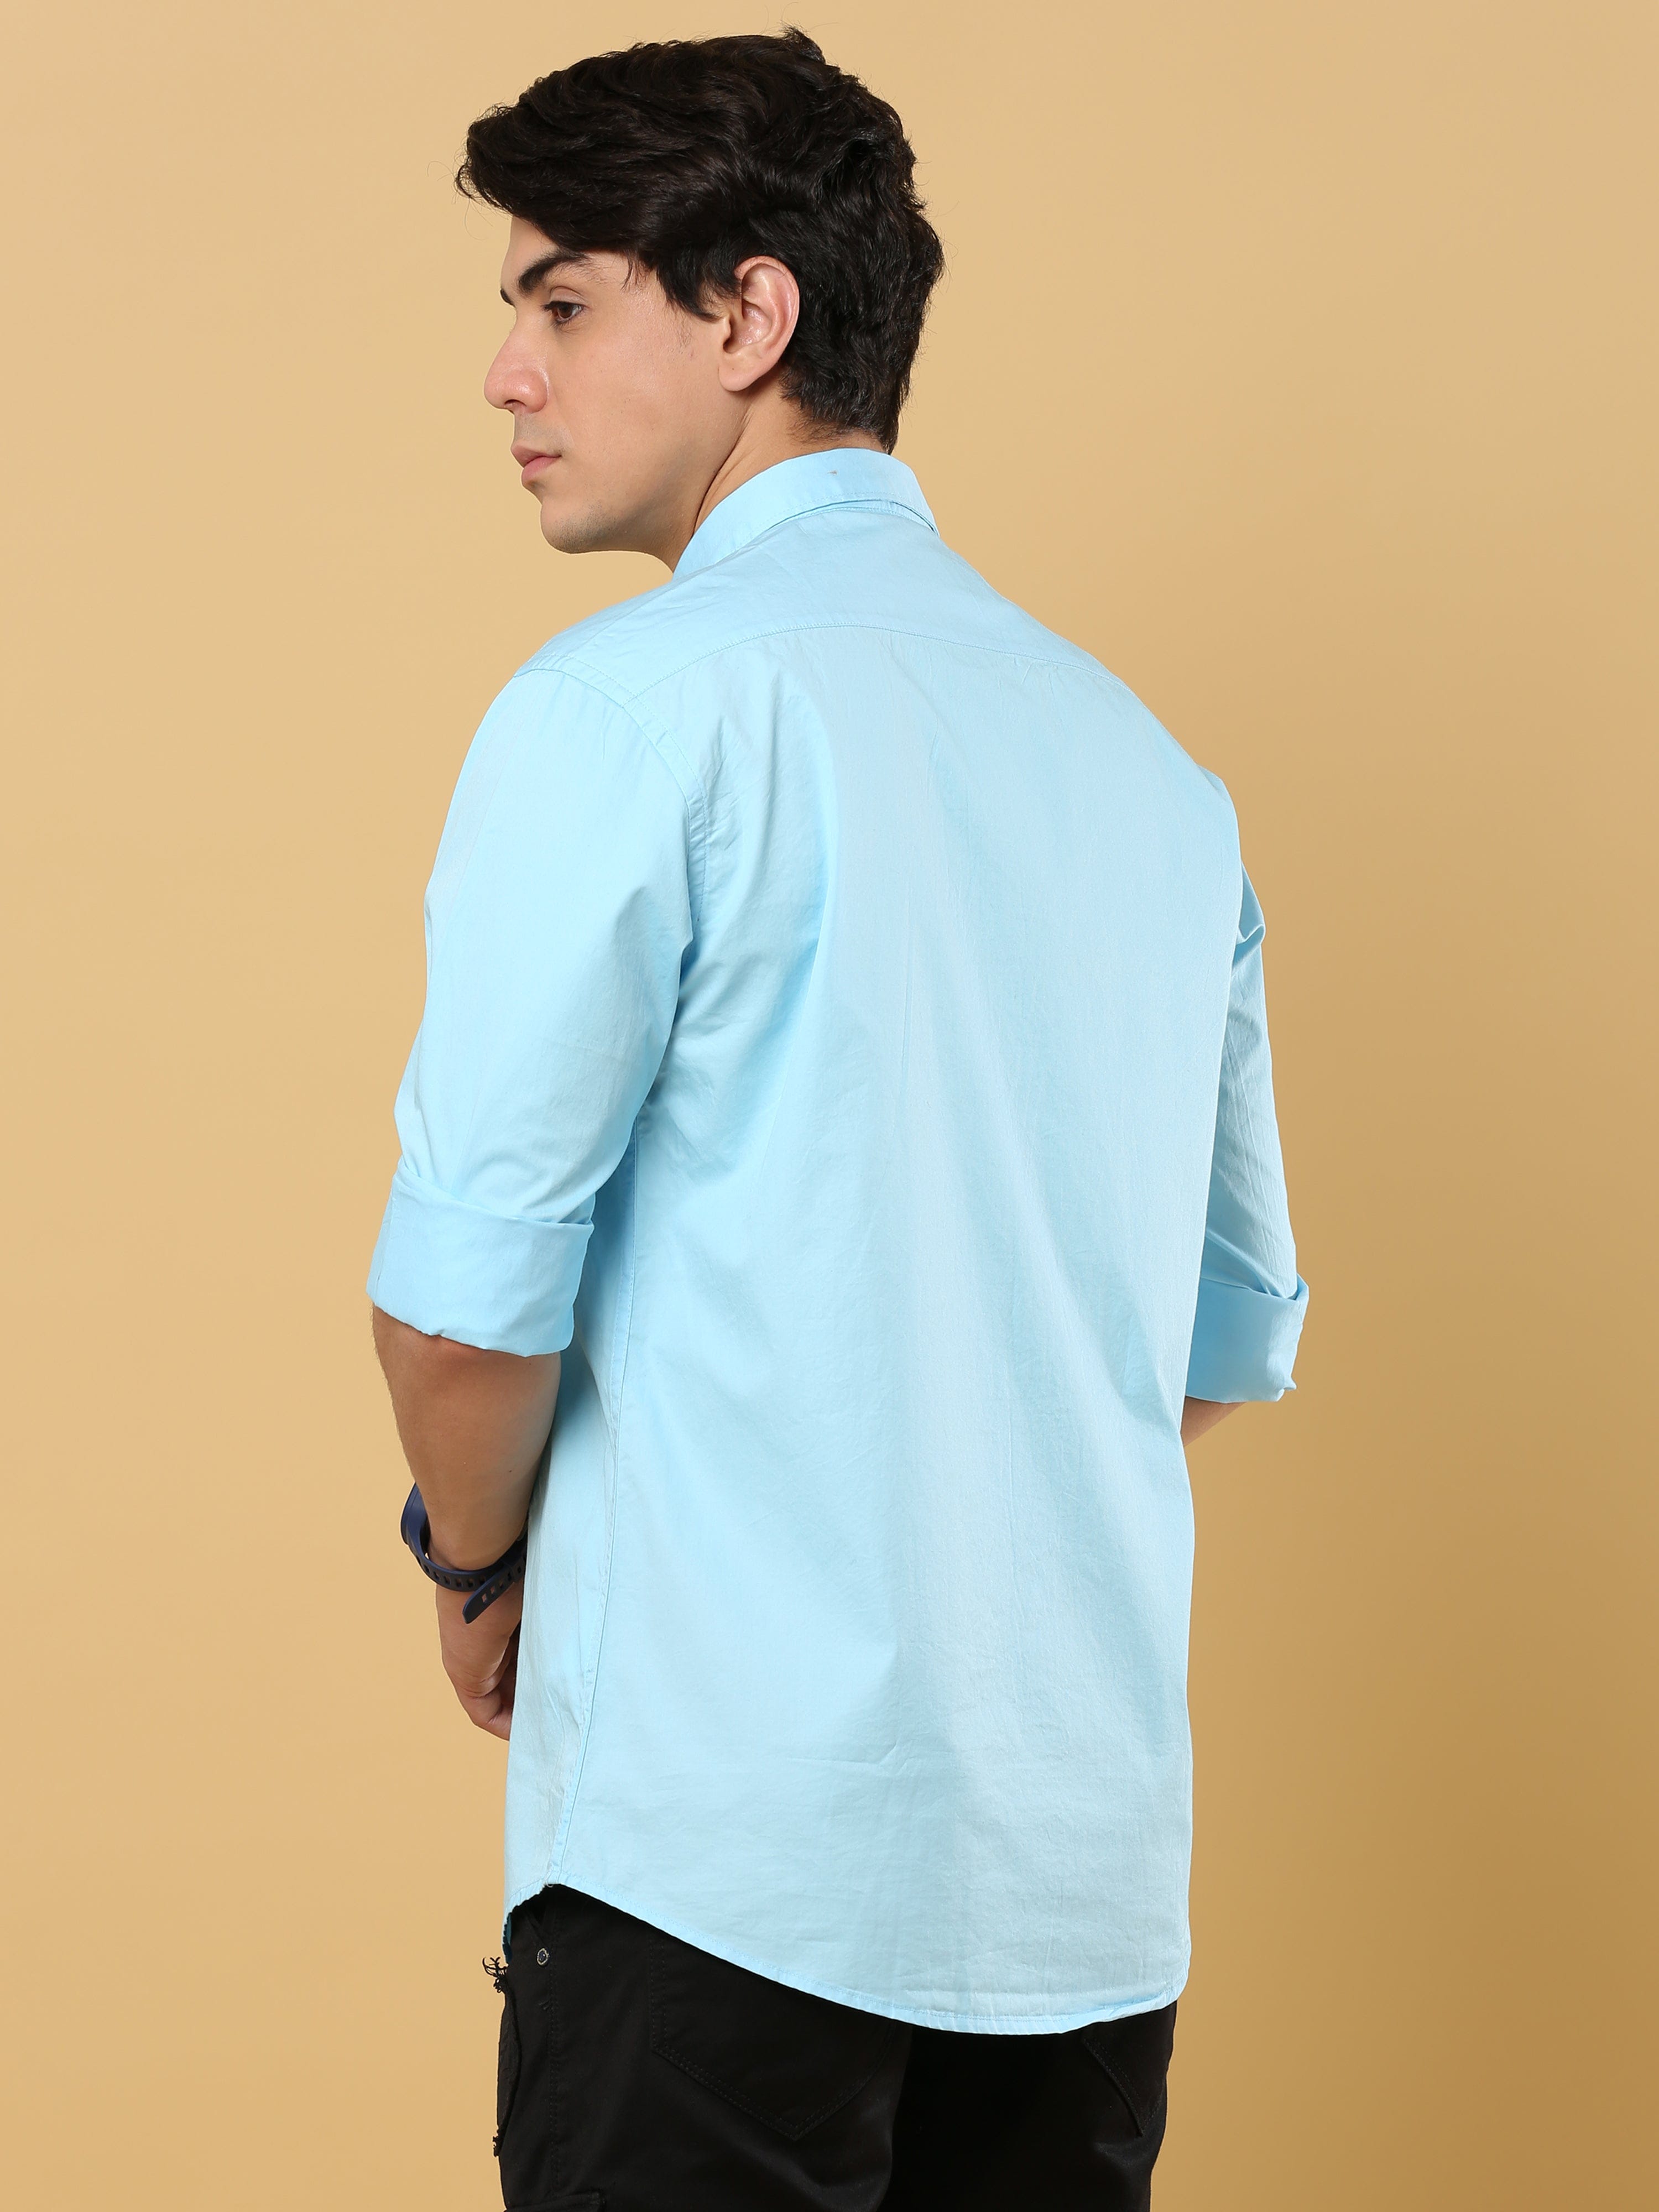 Buy Stylish Solid Sky Blue Color Shirt Online In IndiaRs. 999.00